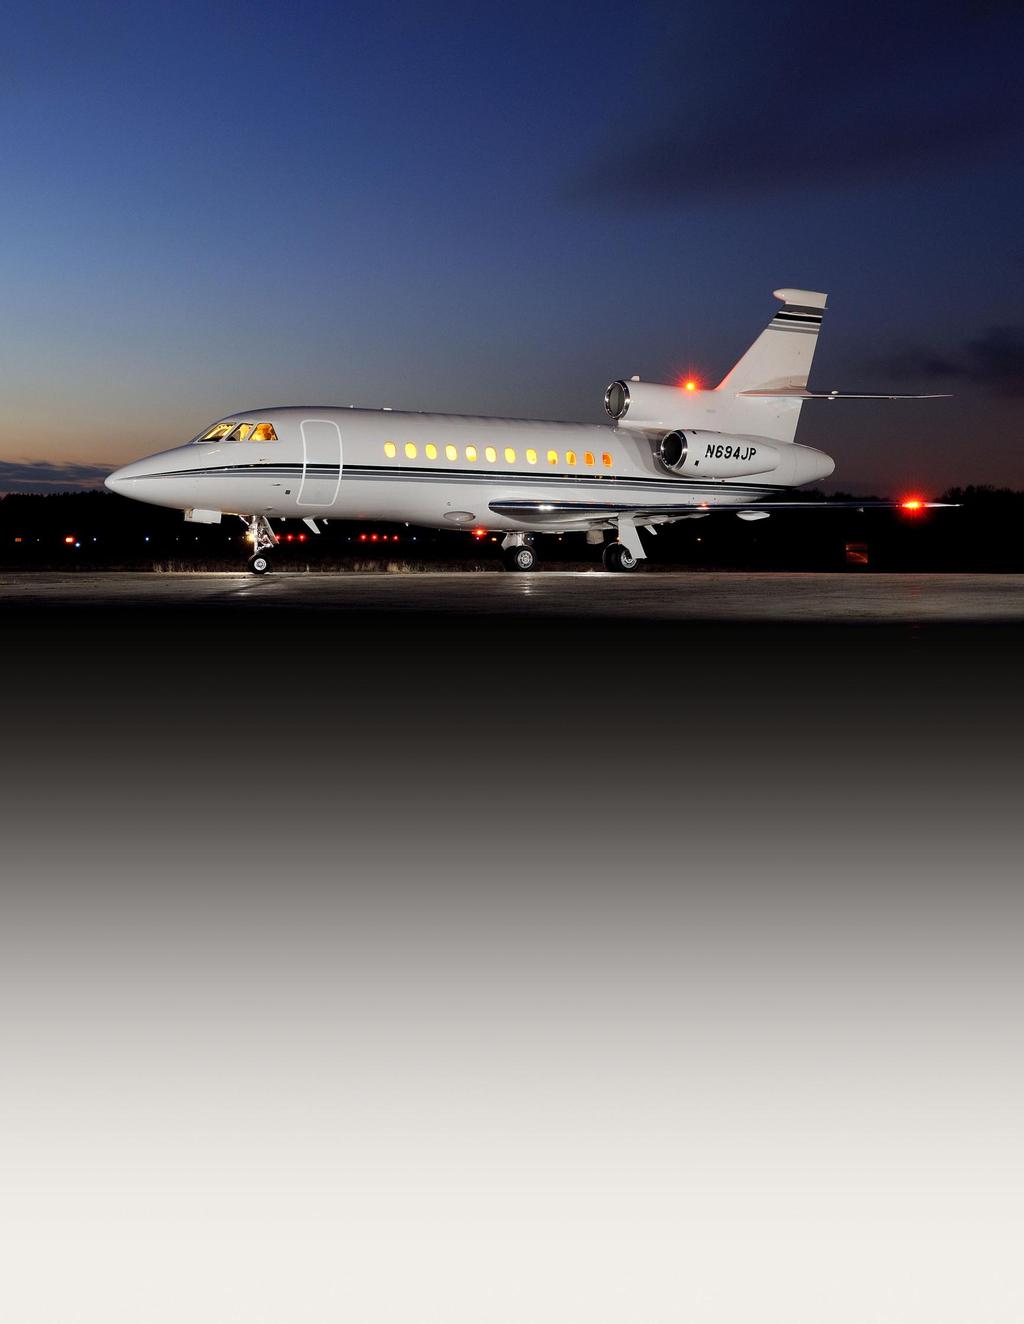 2000 FALCON 900EX N694JP S/N59 Specifications and